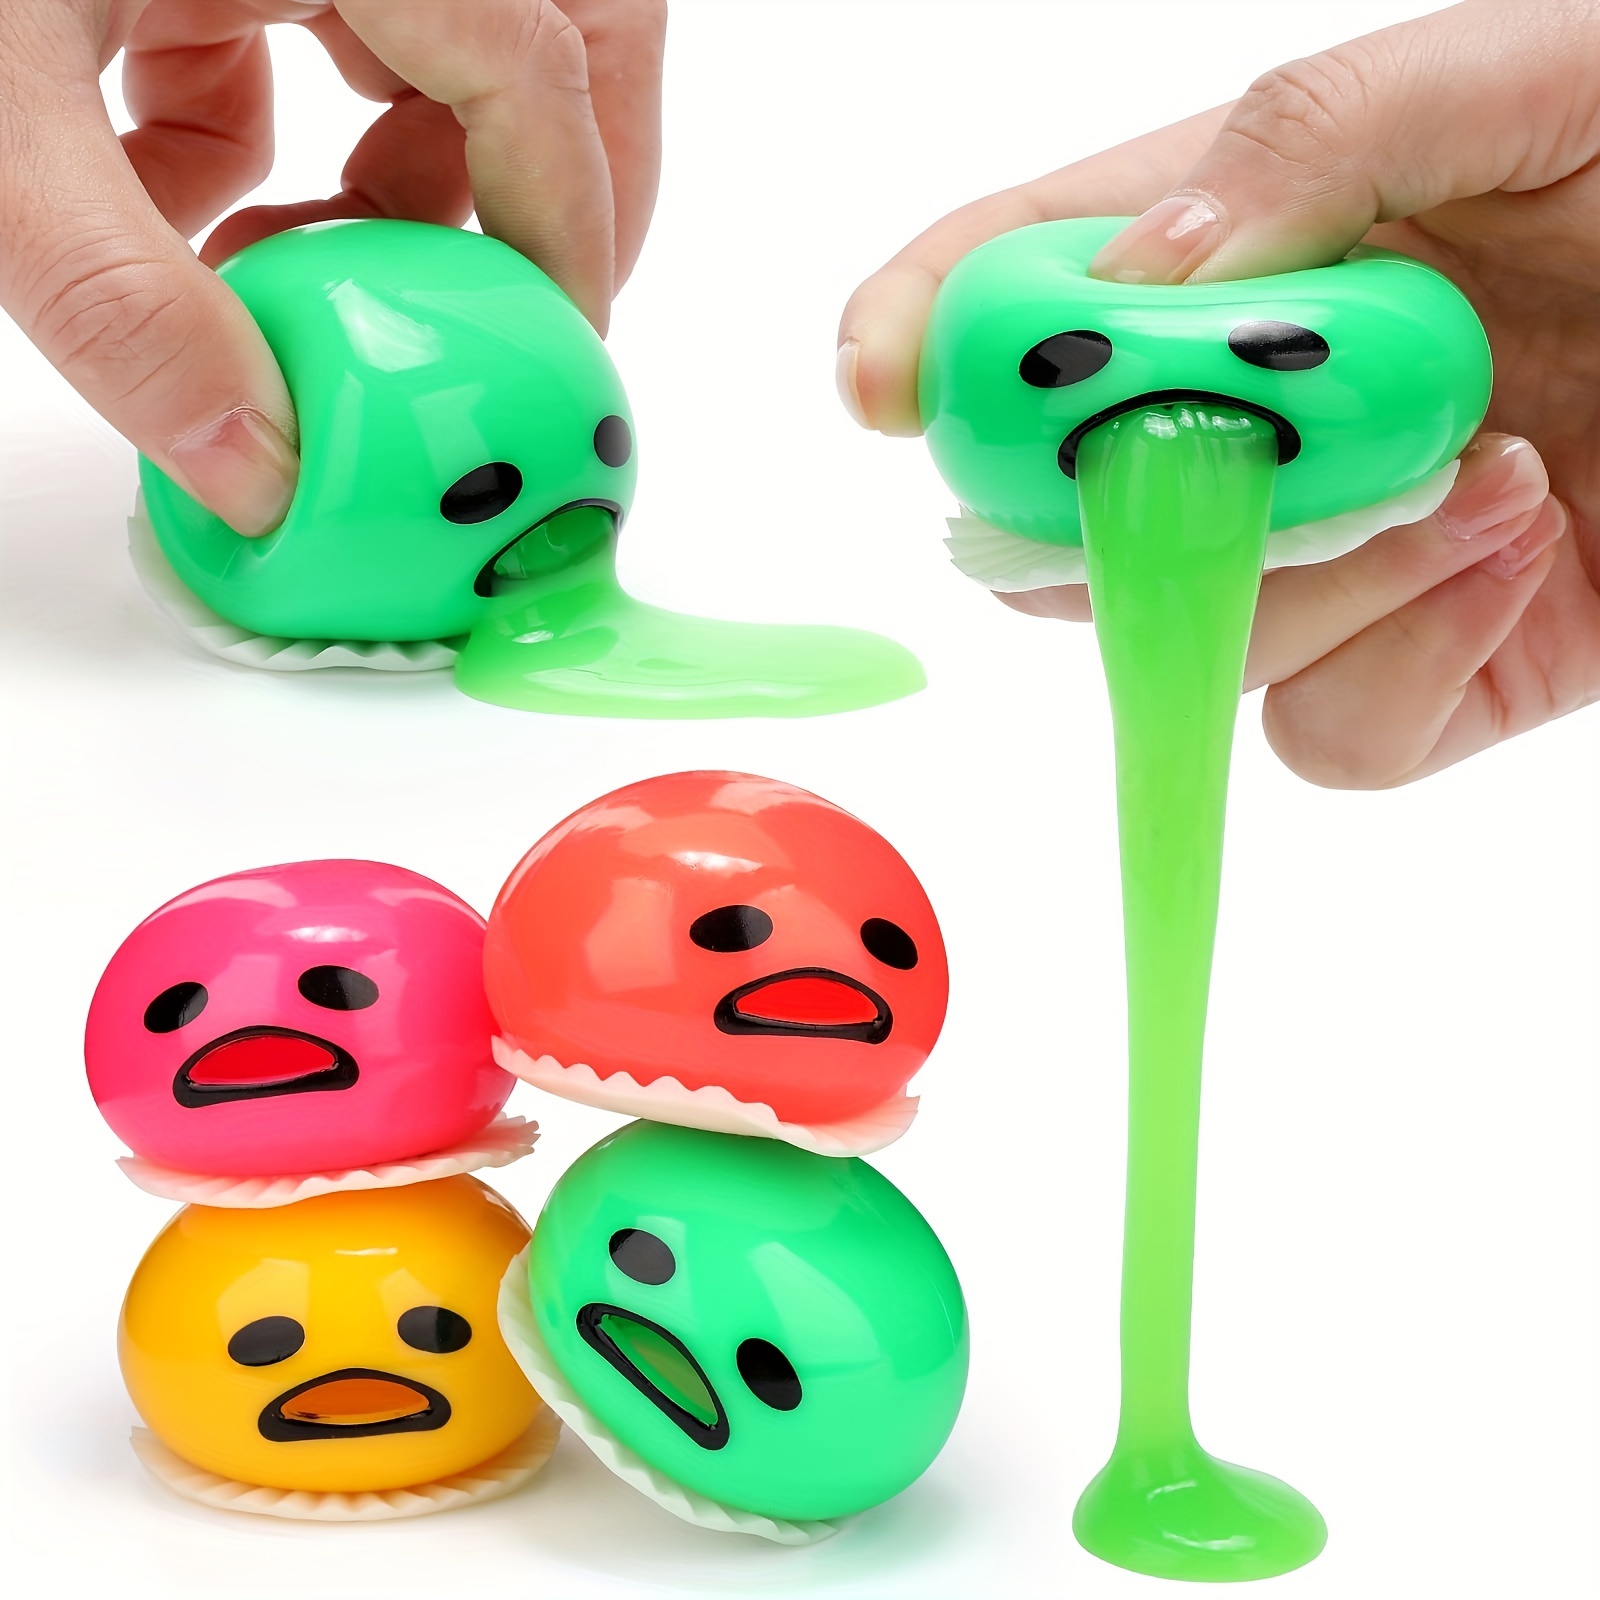  Vomiting Stress Ball, Egg Yolk Slime Ball Prank Toy, Cute Lazy  Vomiting Sucking Ball, Funny Stress Relief Fidget Toys Gag Gifts (4 PCS & 4  Colors) : Toys & Games